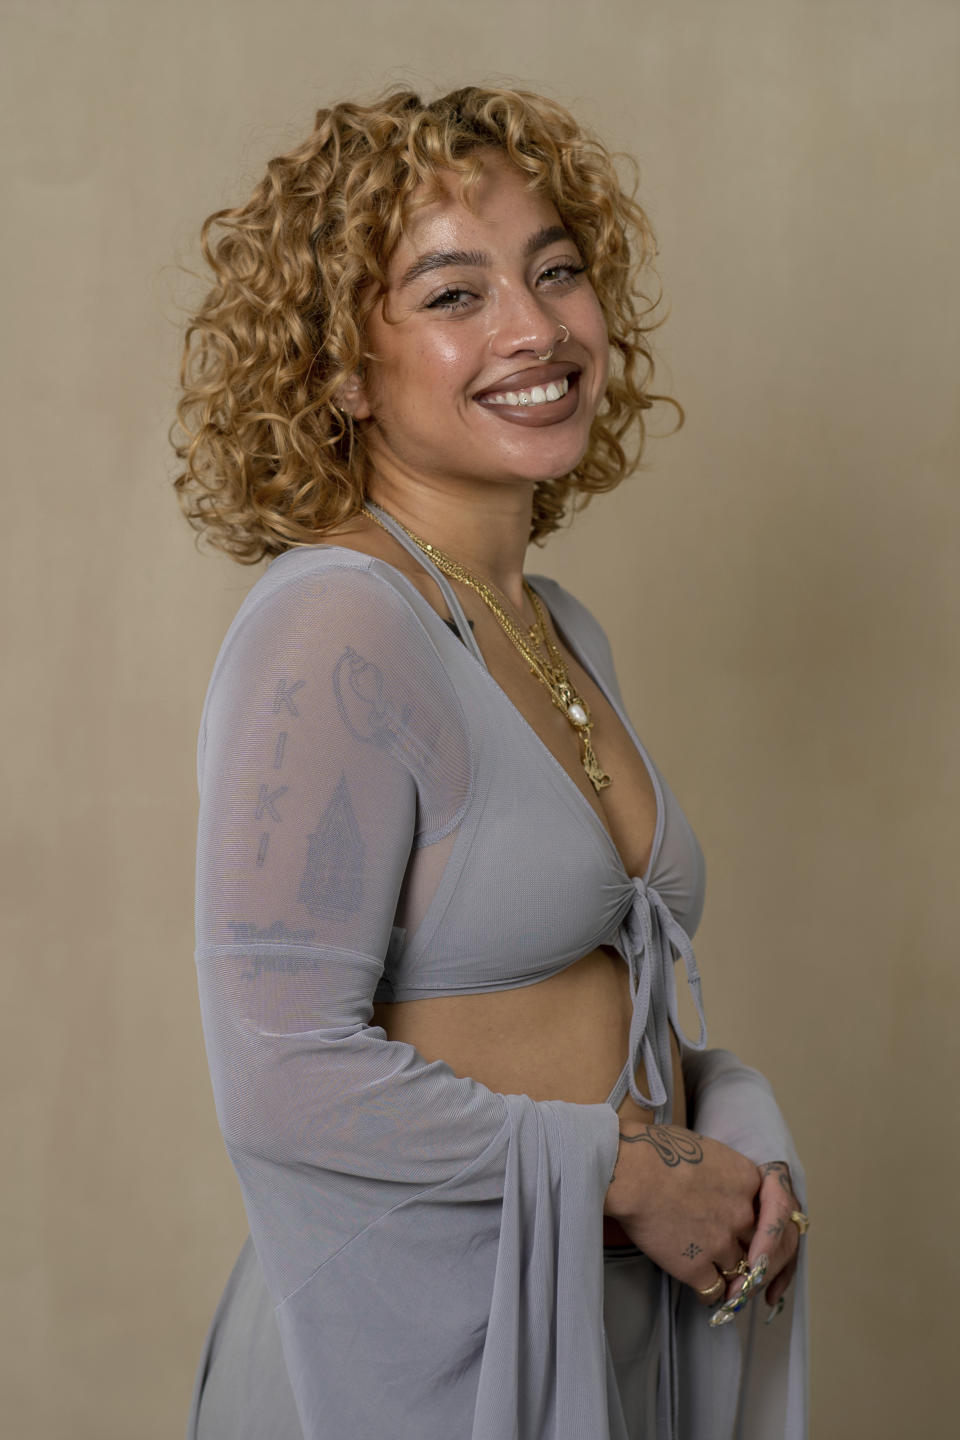 R&B singer Kiana Lede poses for a portrait on Tuesday, Oct. 3, 2023, in New York to promote her album “Grudges." (AP Photo/Gary Gerard Hamilton)